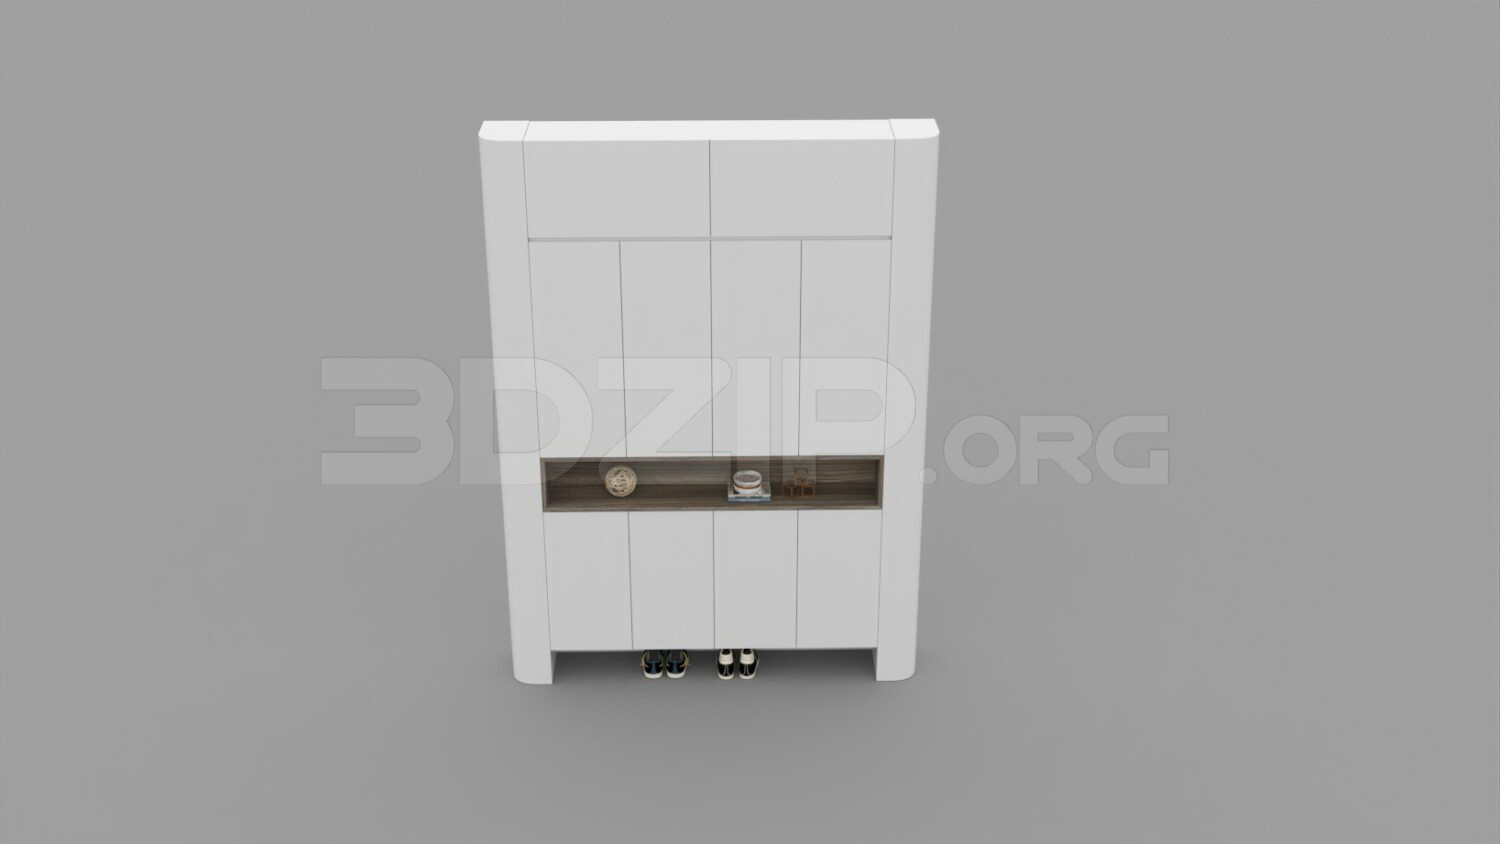 2458. Download Free Shoe Cabinet Model By Nguyen Ngoc Tung